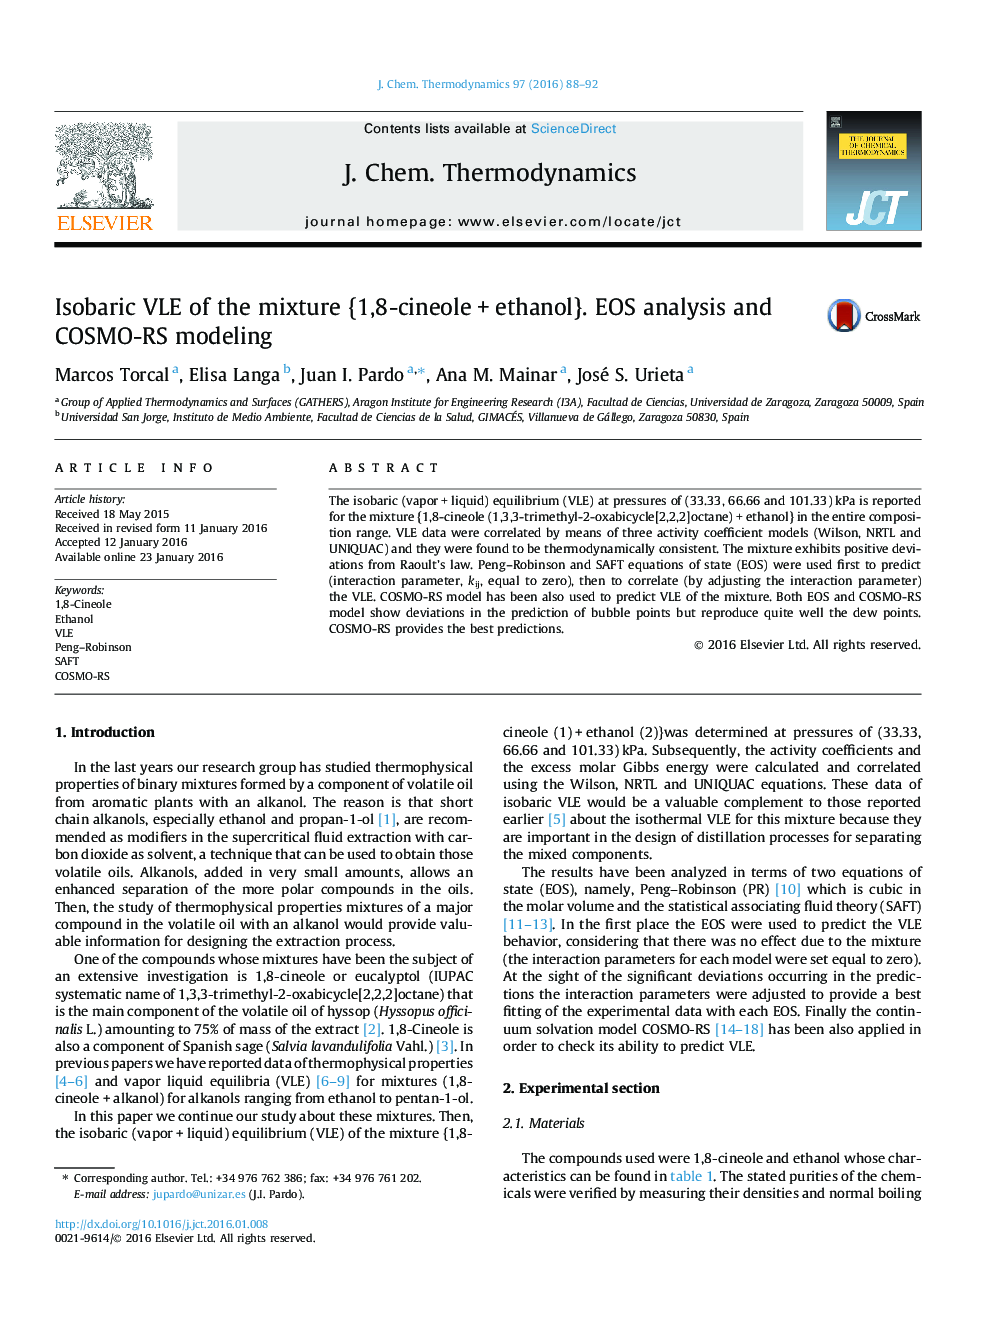 Isobaric VLE of the mixture {1,8-cineoleÂ +Â ethanol}. EOS analysis and COSMO-RS modeling